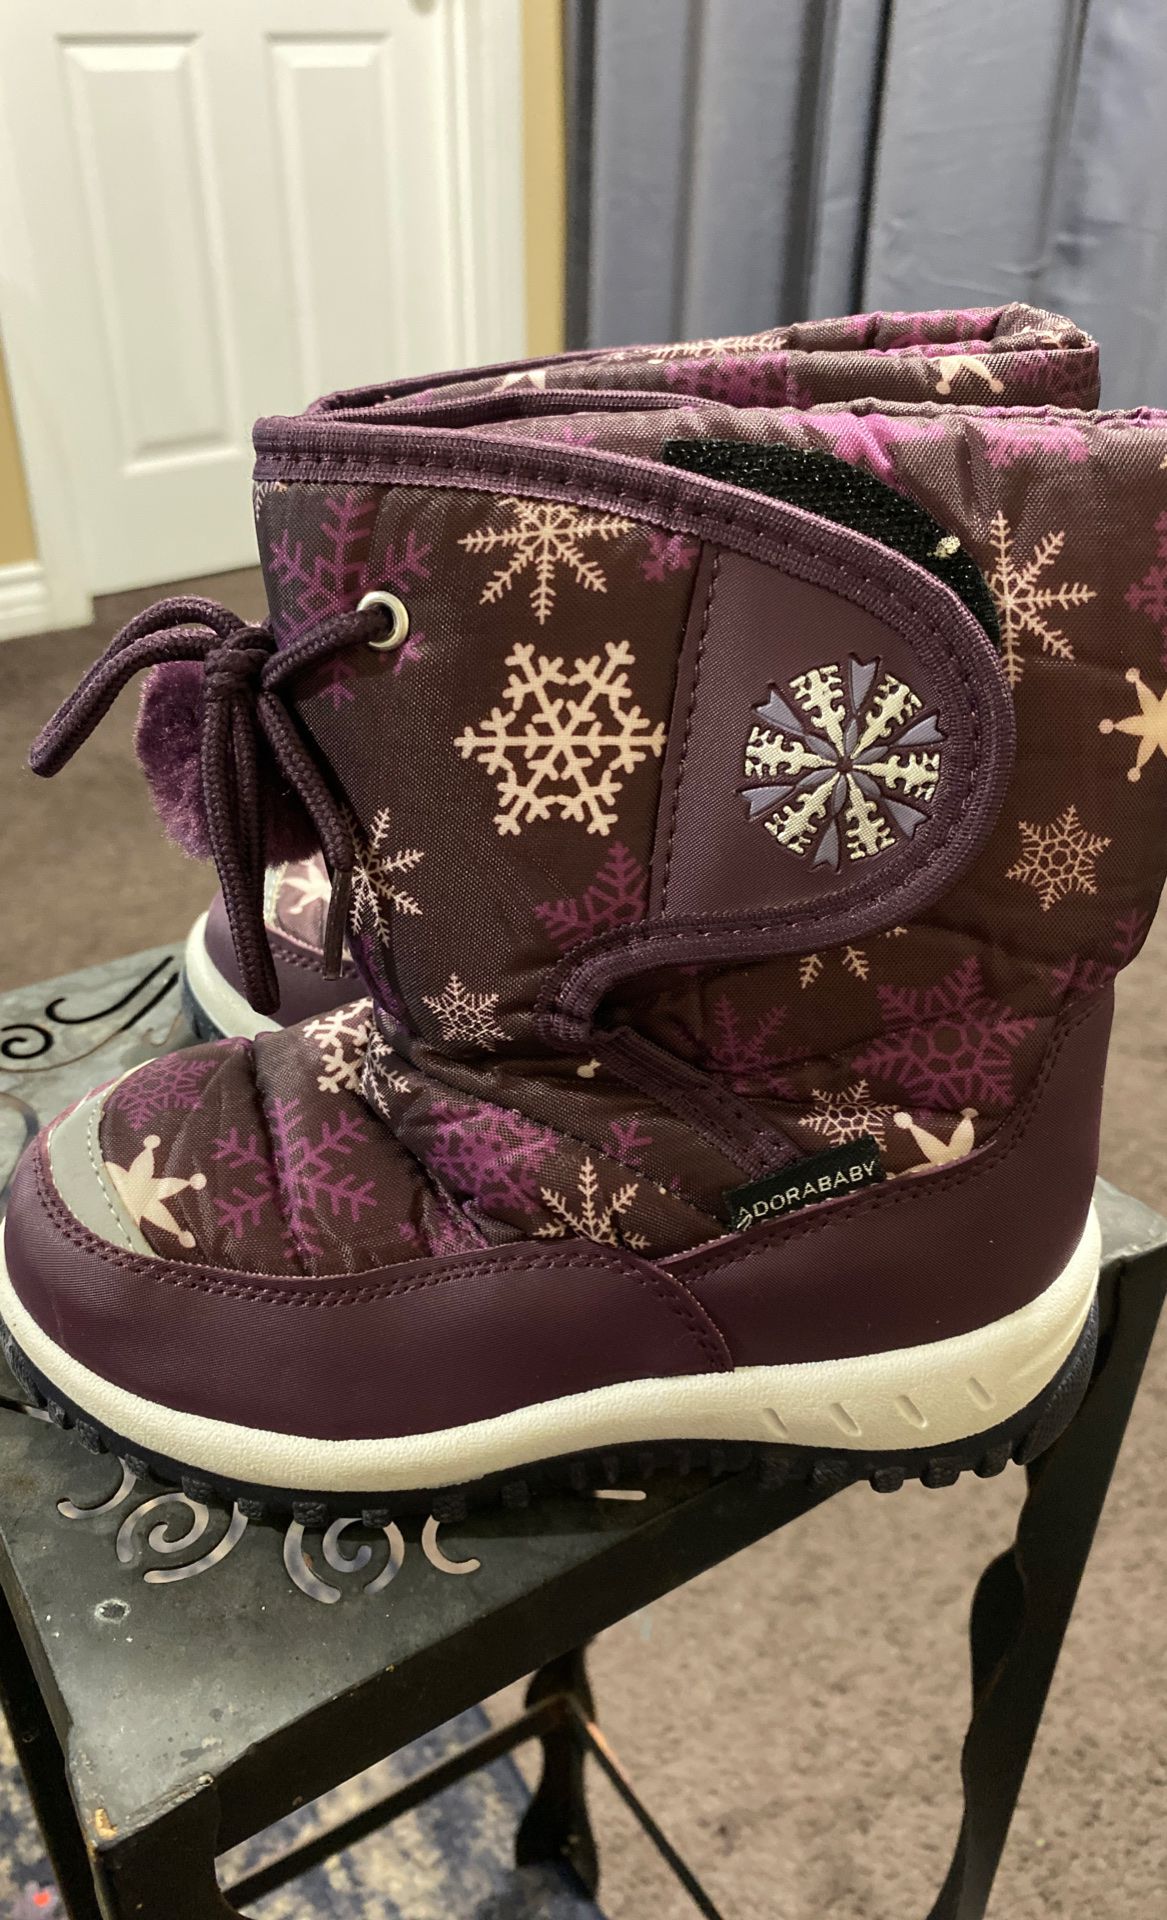 Toddler Girl Size 11 (28) Snow boots Adorababy